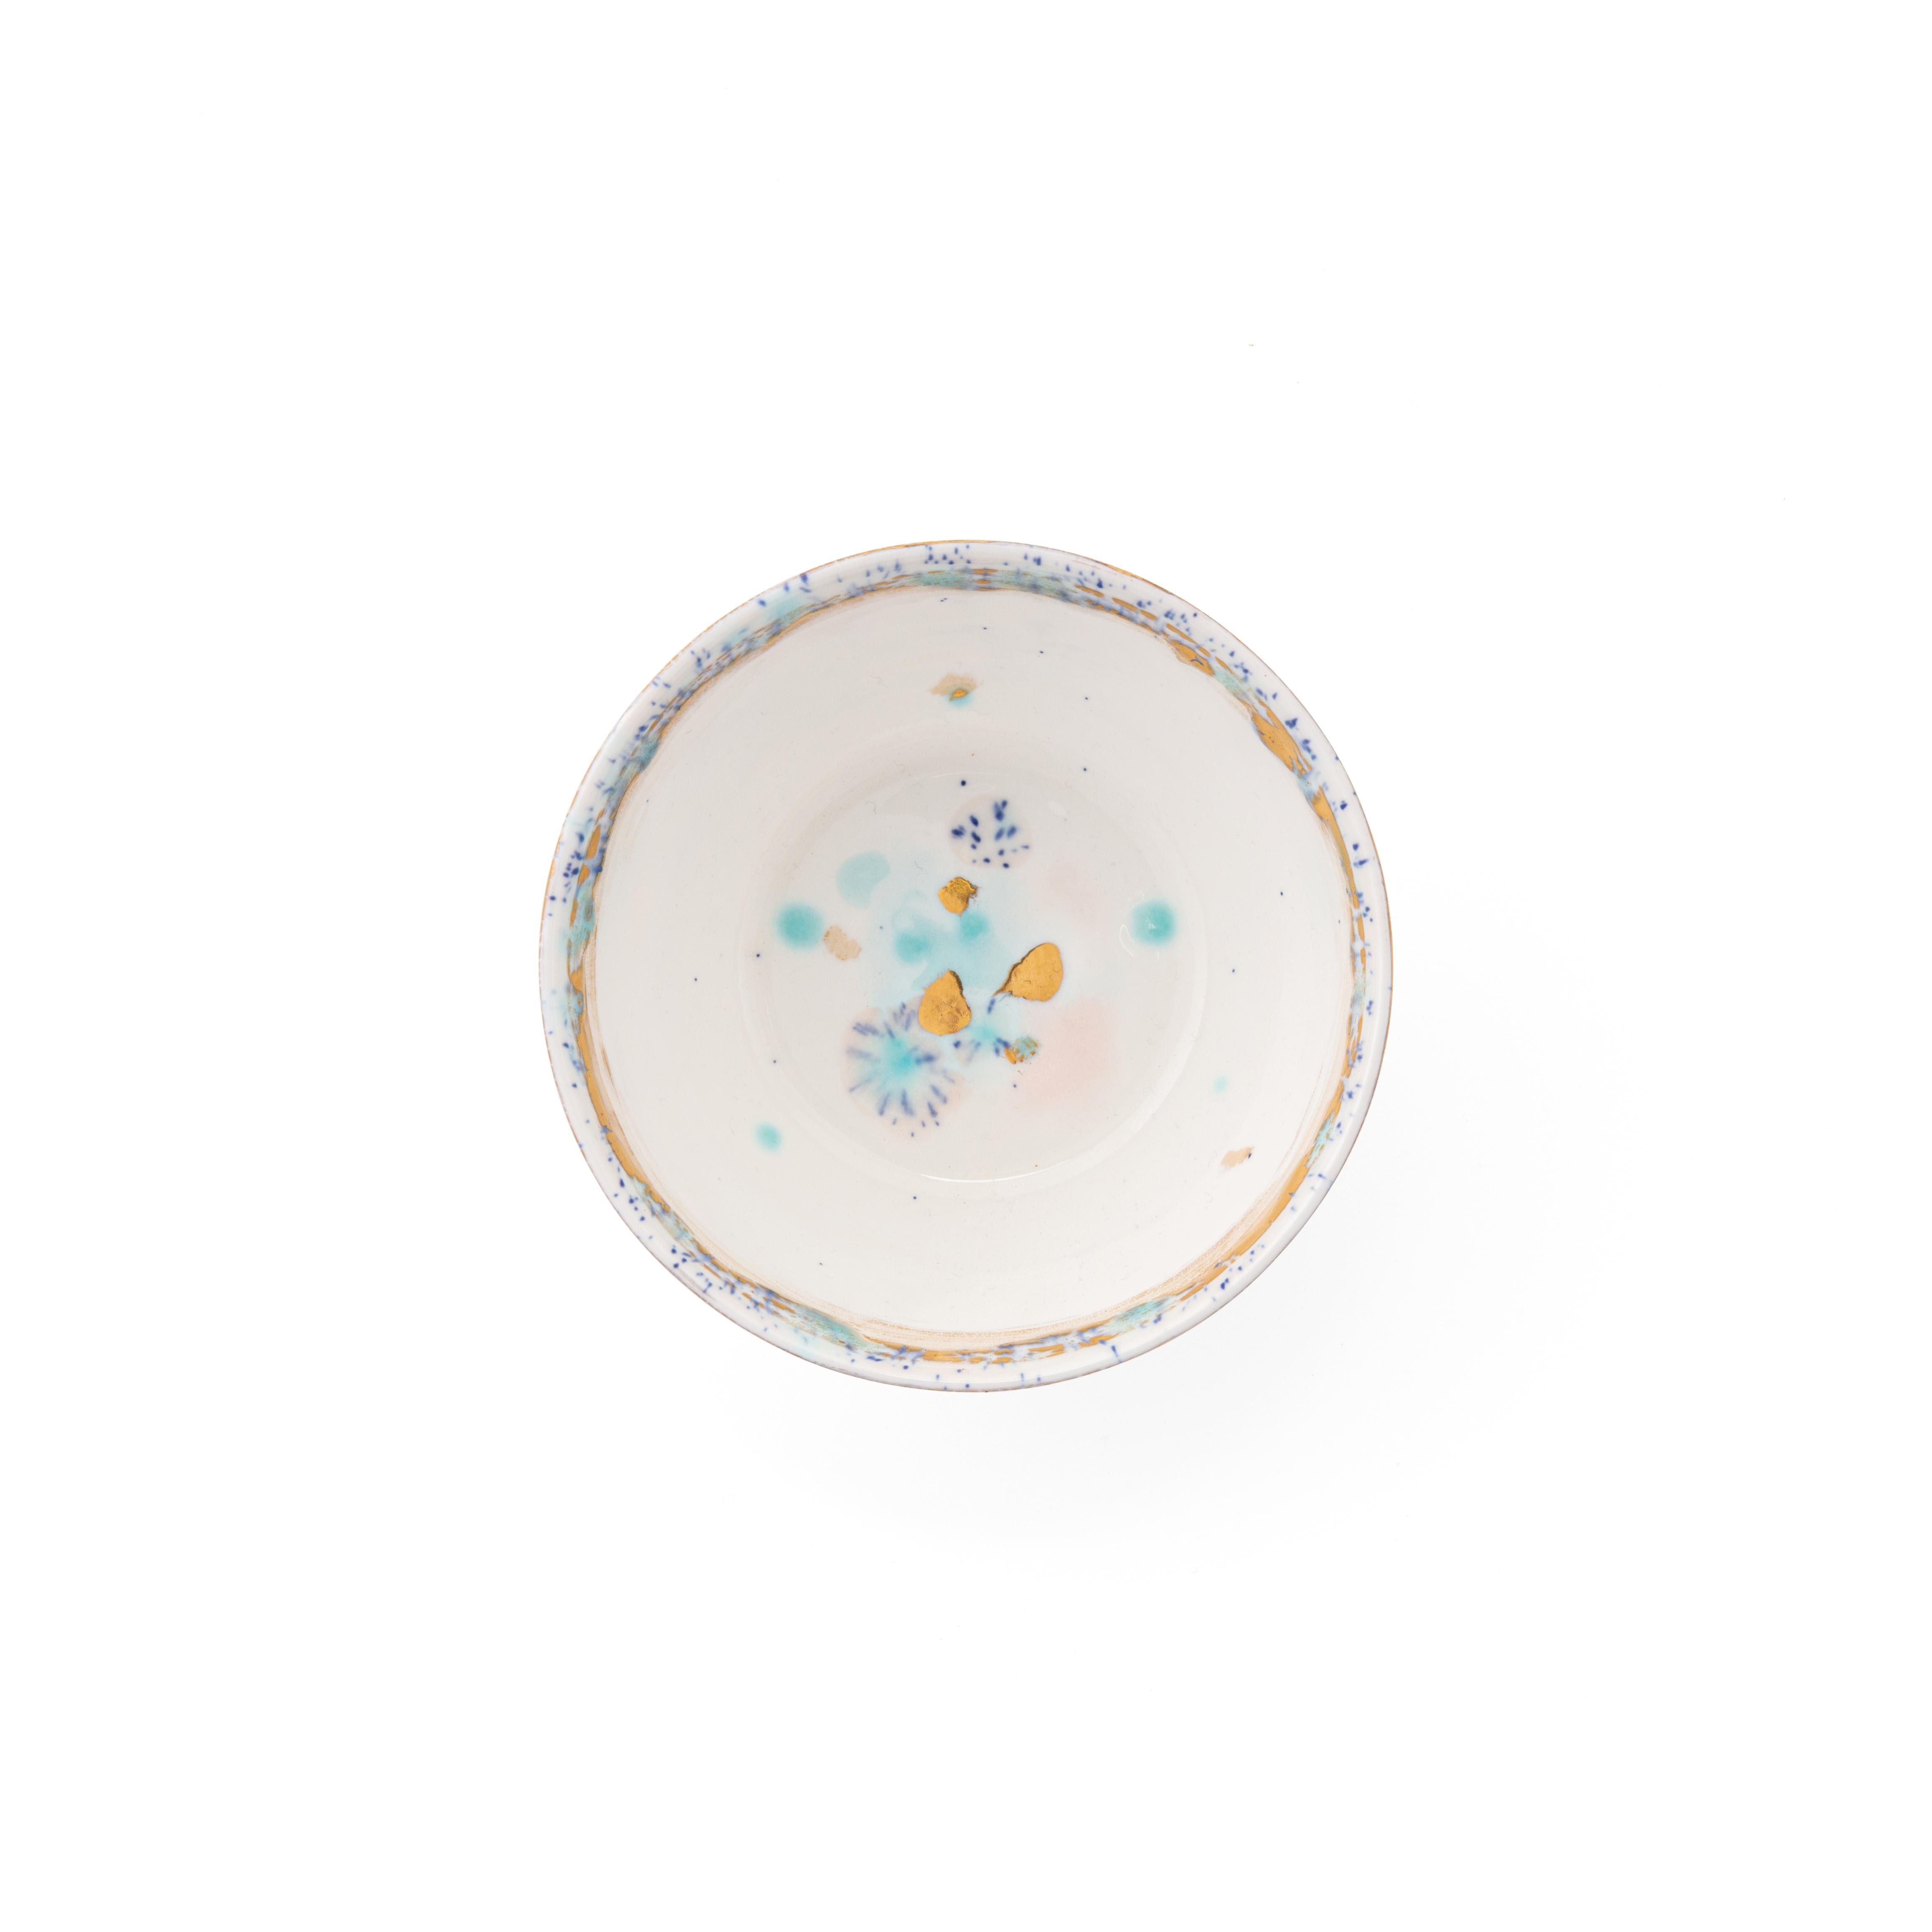 Hand painted in Italy from the finest porcelain, this Dafne Fruit Bowl has a narrow pink and blue dotted rim surrounding a broad, delicate golden decor of stylized flowers, the center is white with subtle light blue, pink brushes and golden dots